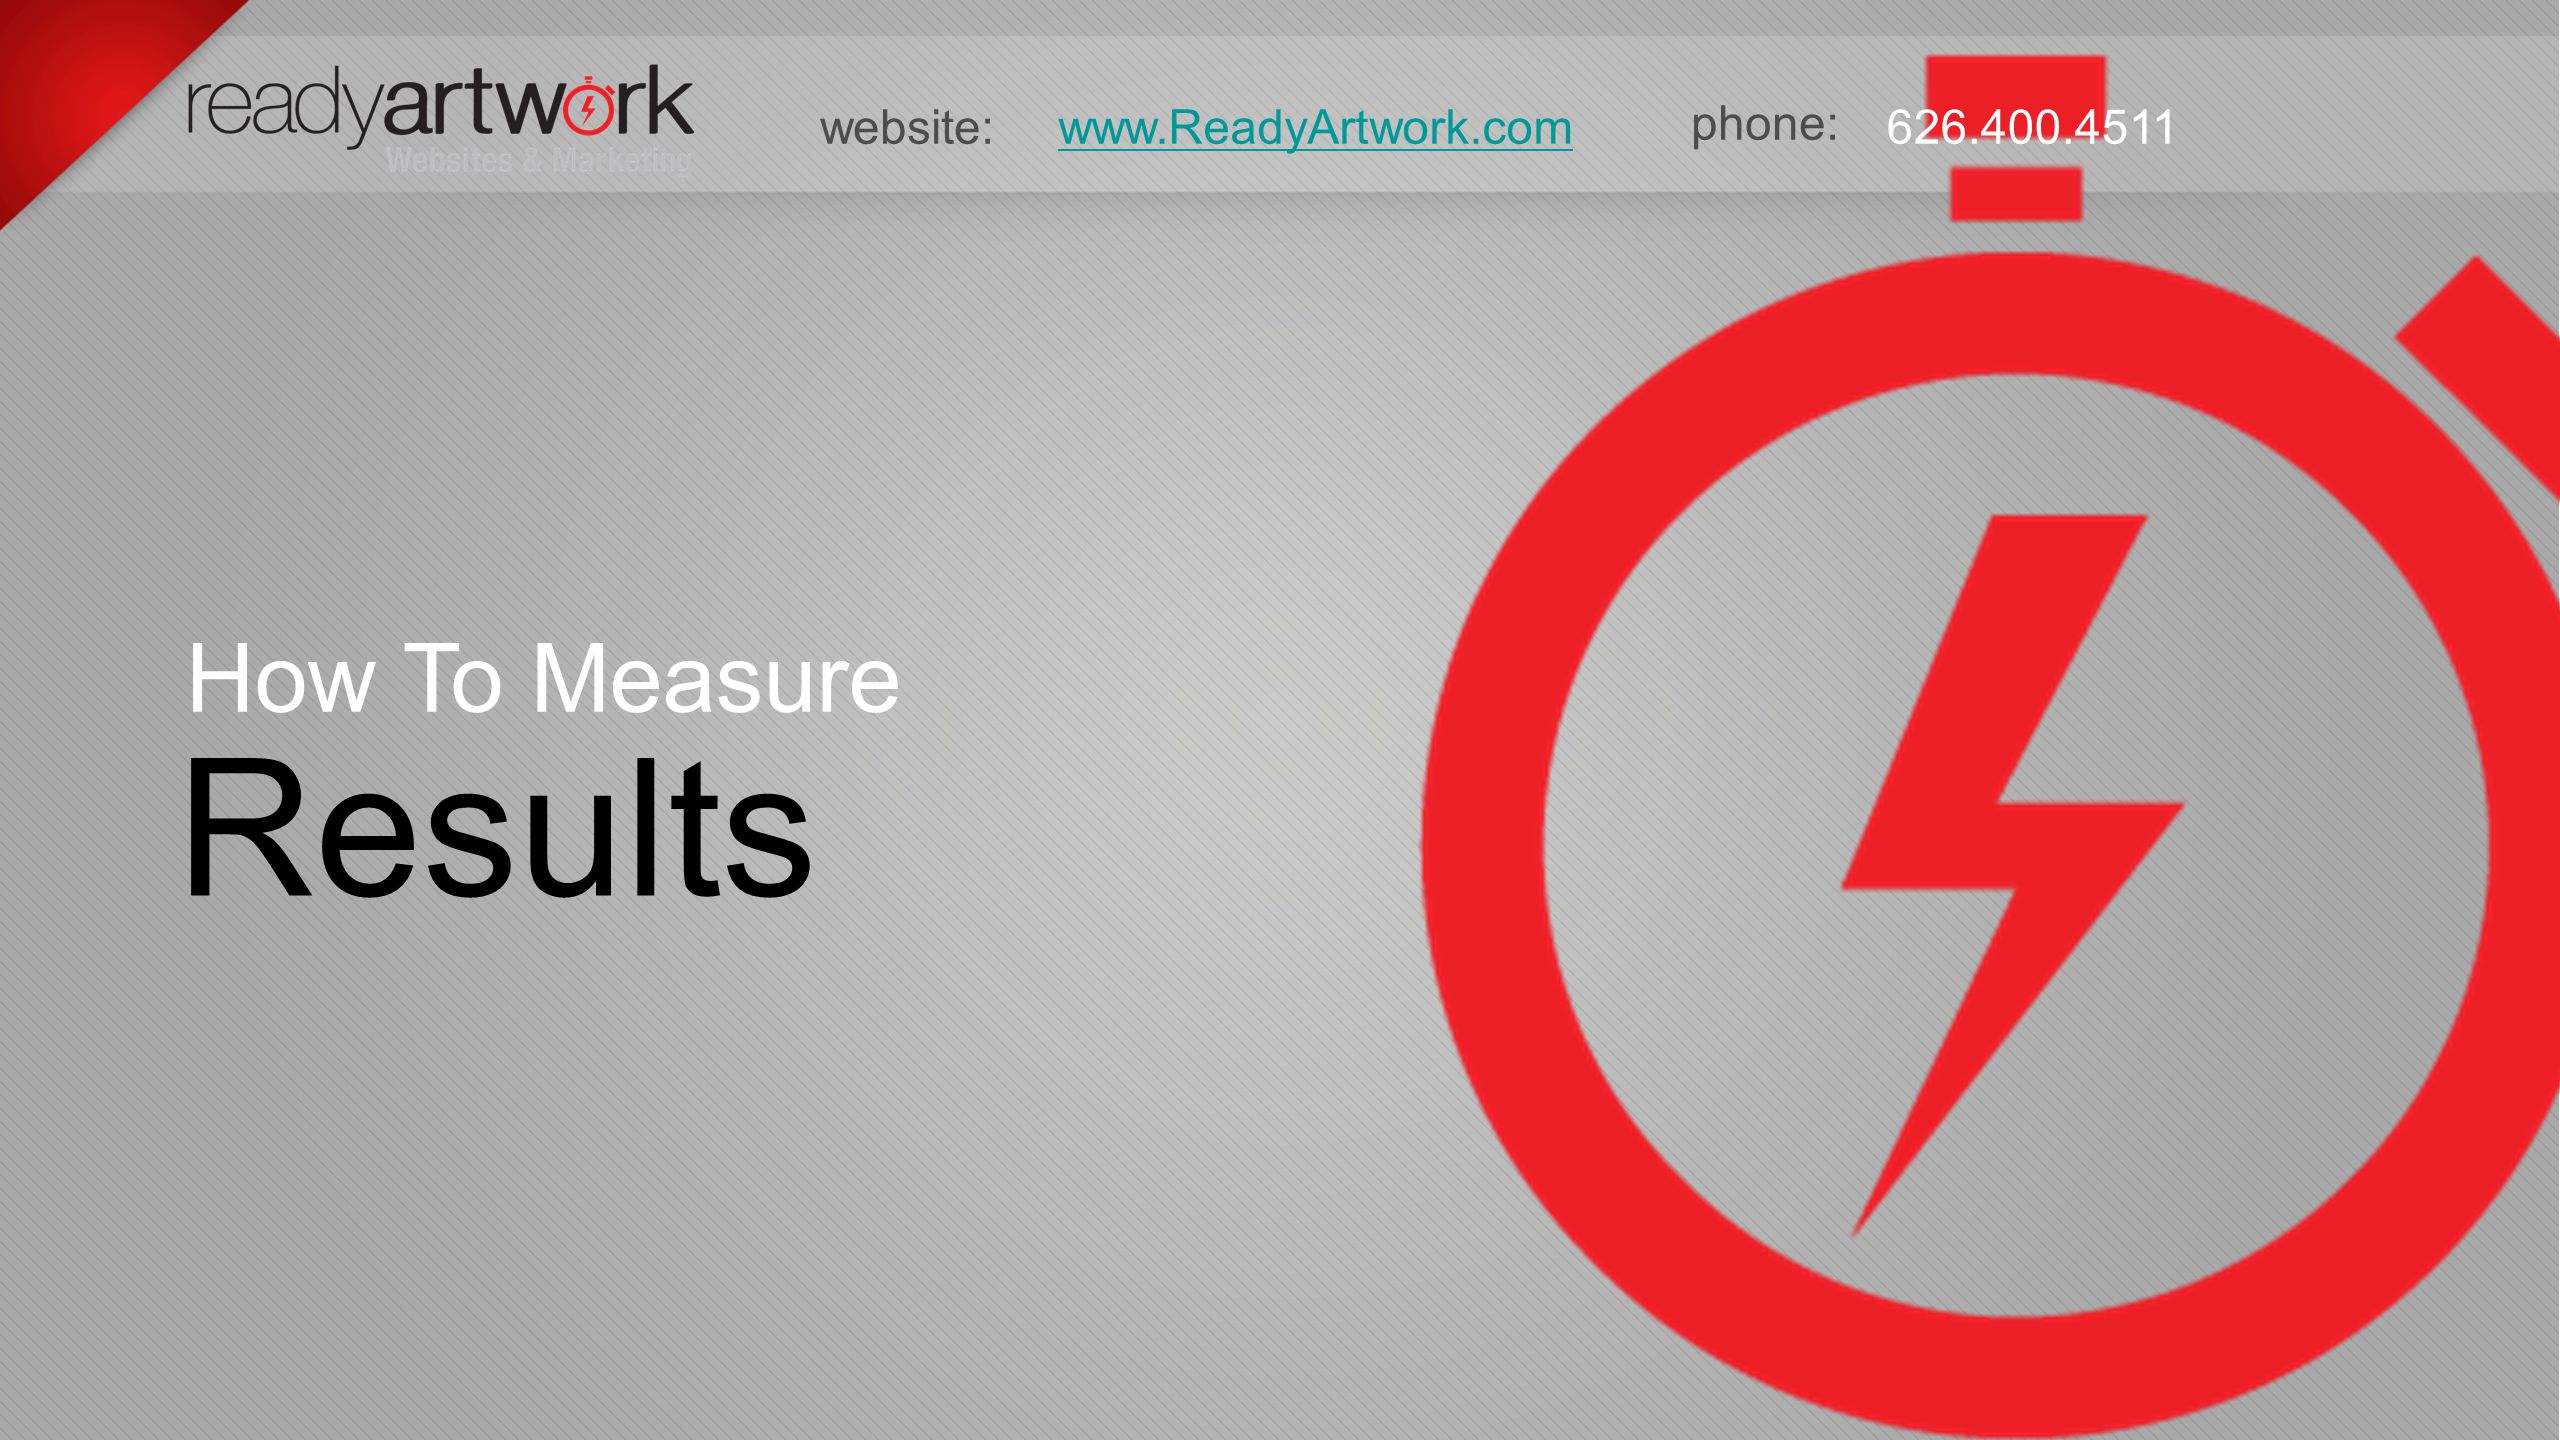 phone: website: Results How To Measure